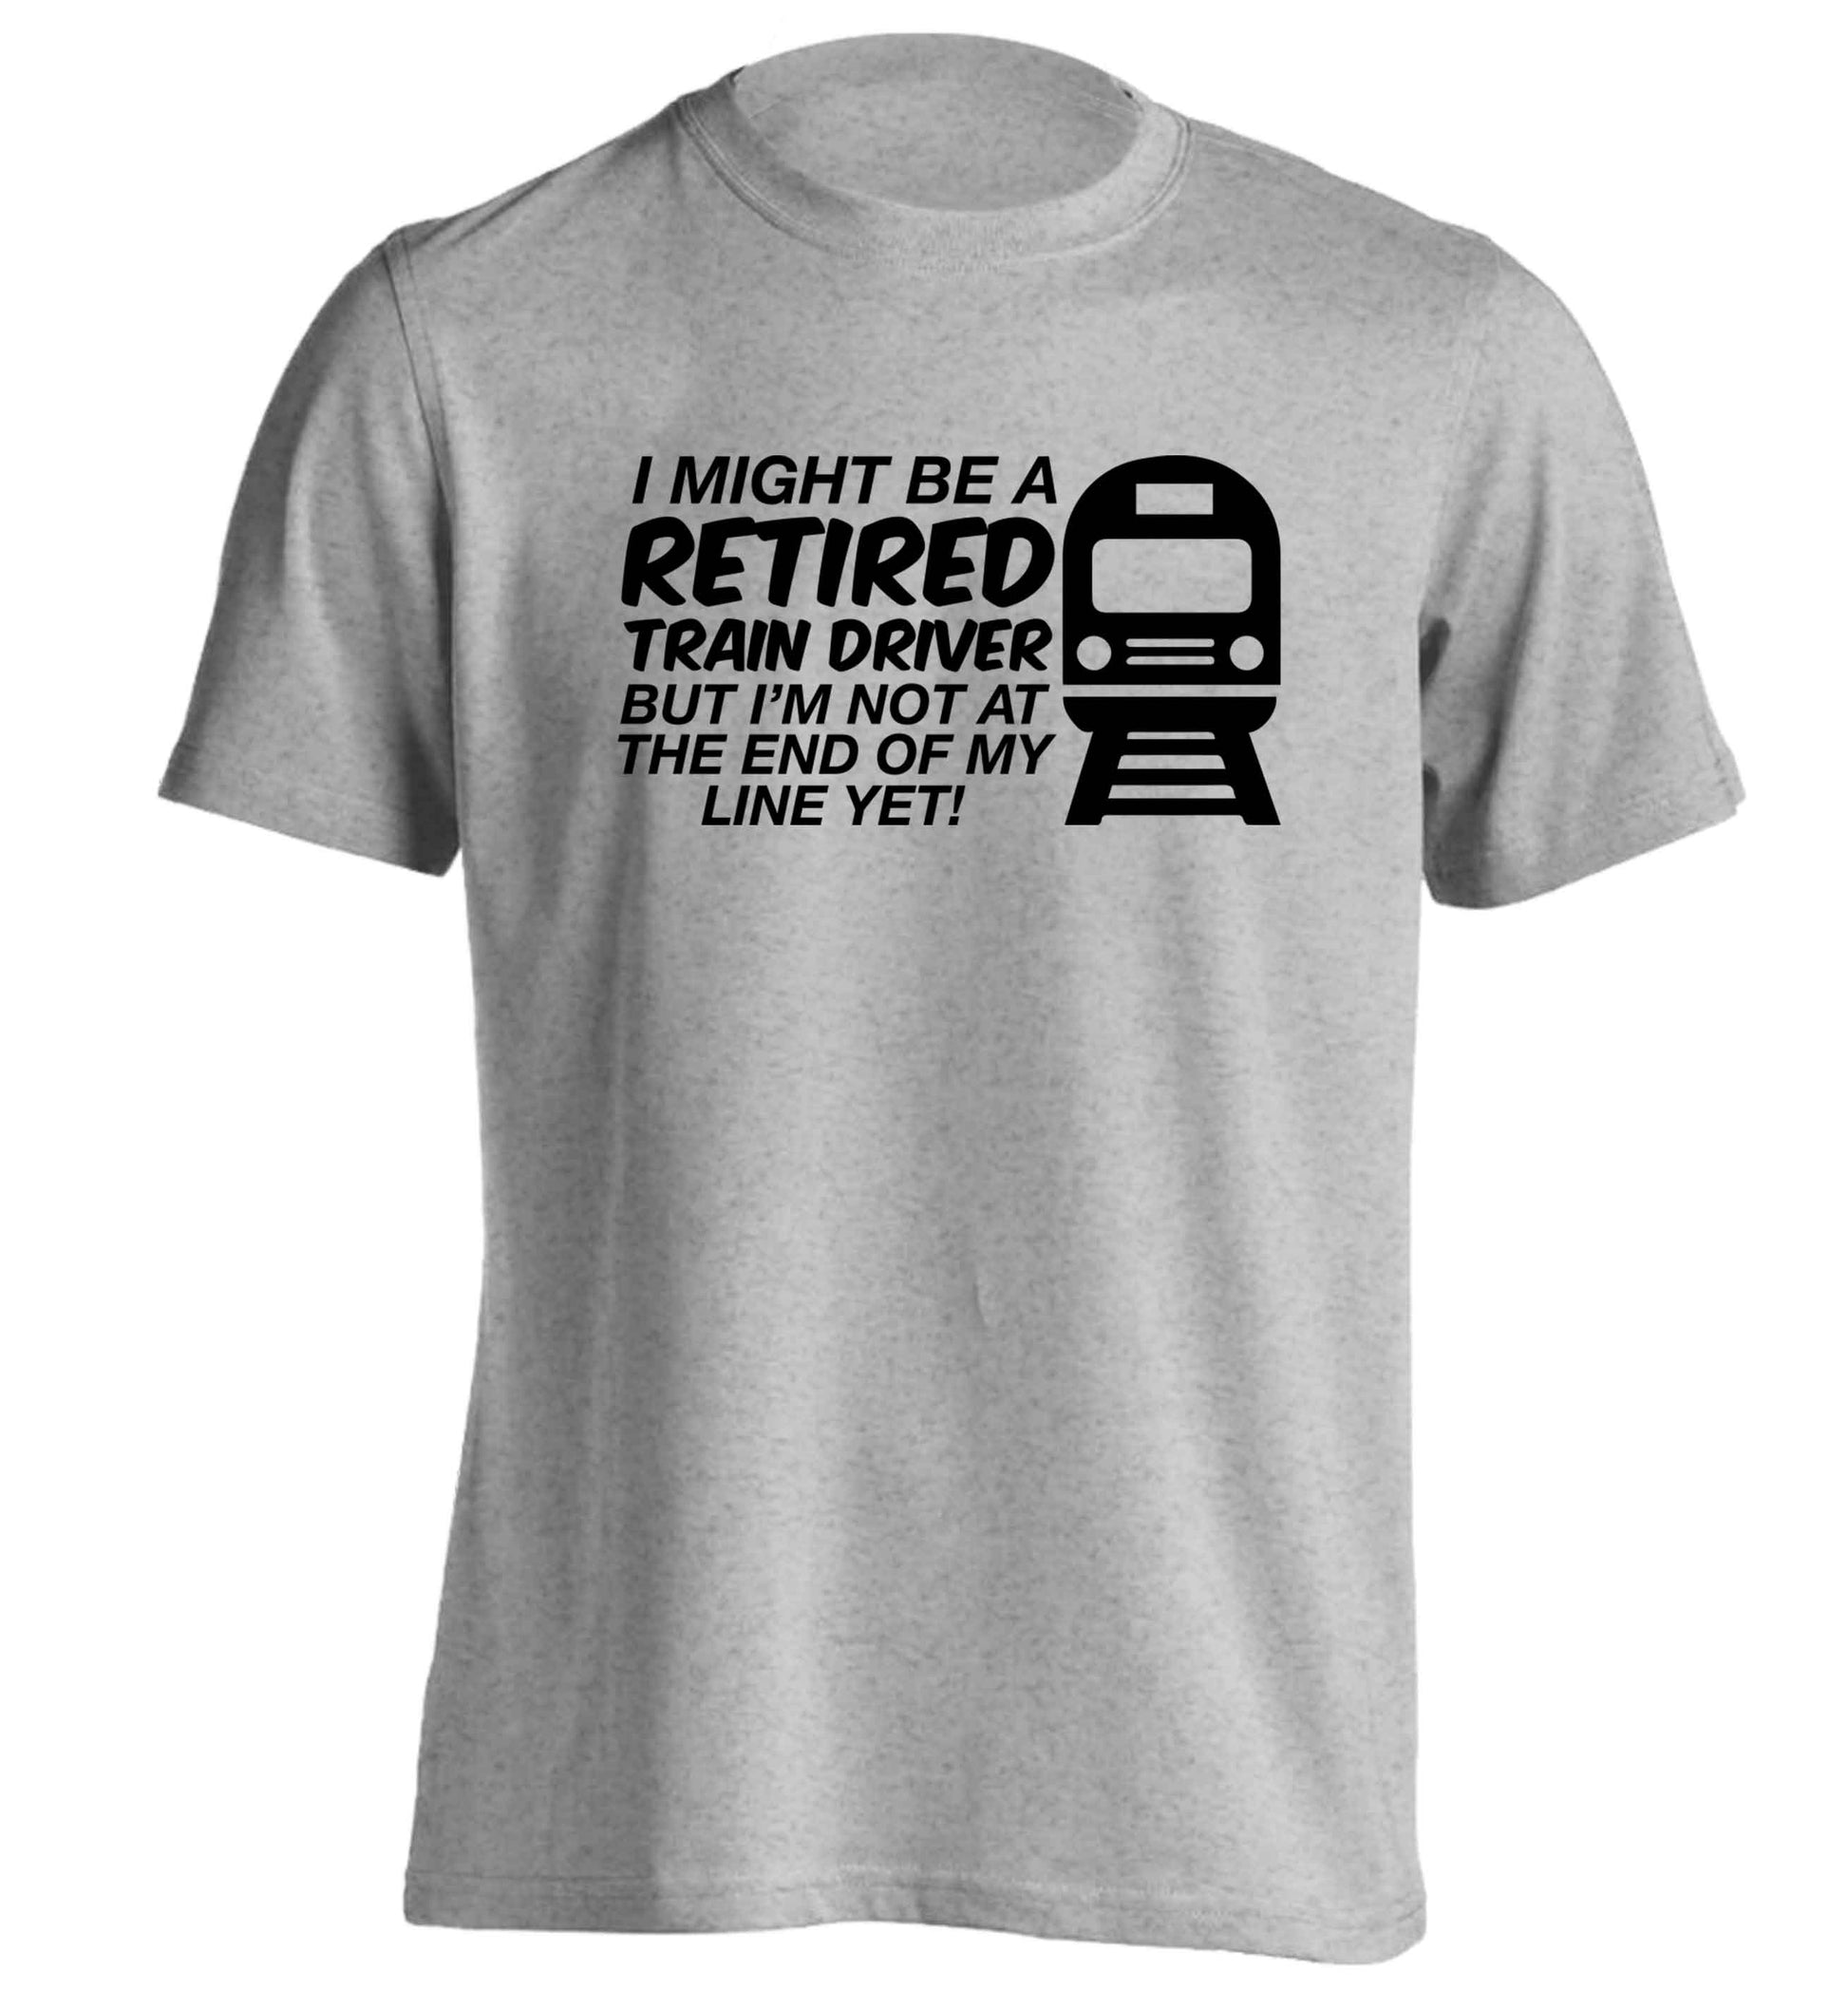 Retired train driver but I'm not at the end of my line yet adults unisex grey Tshirt 2XL